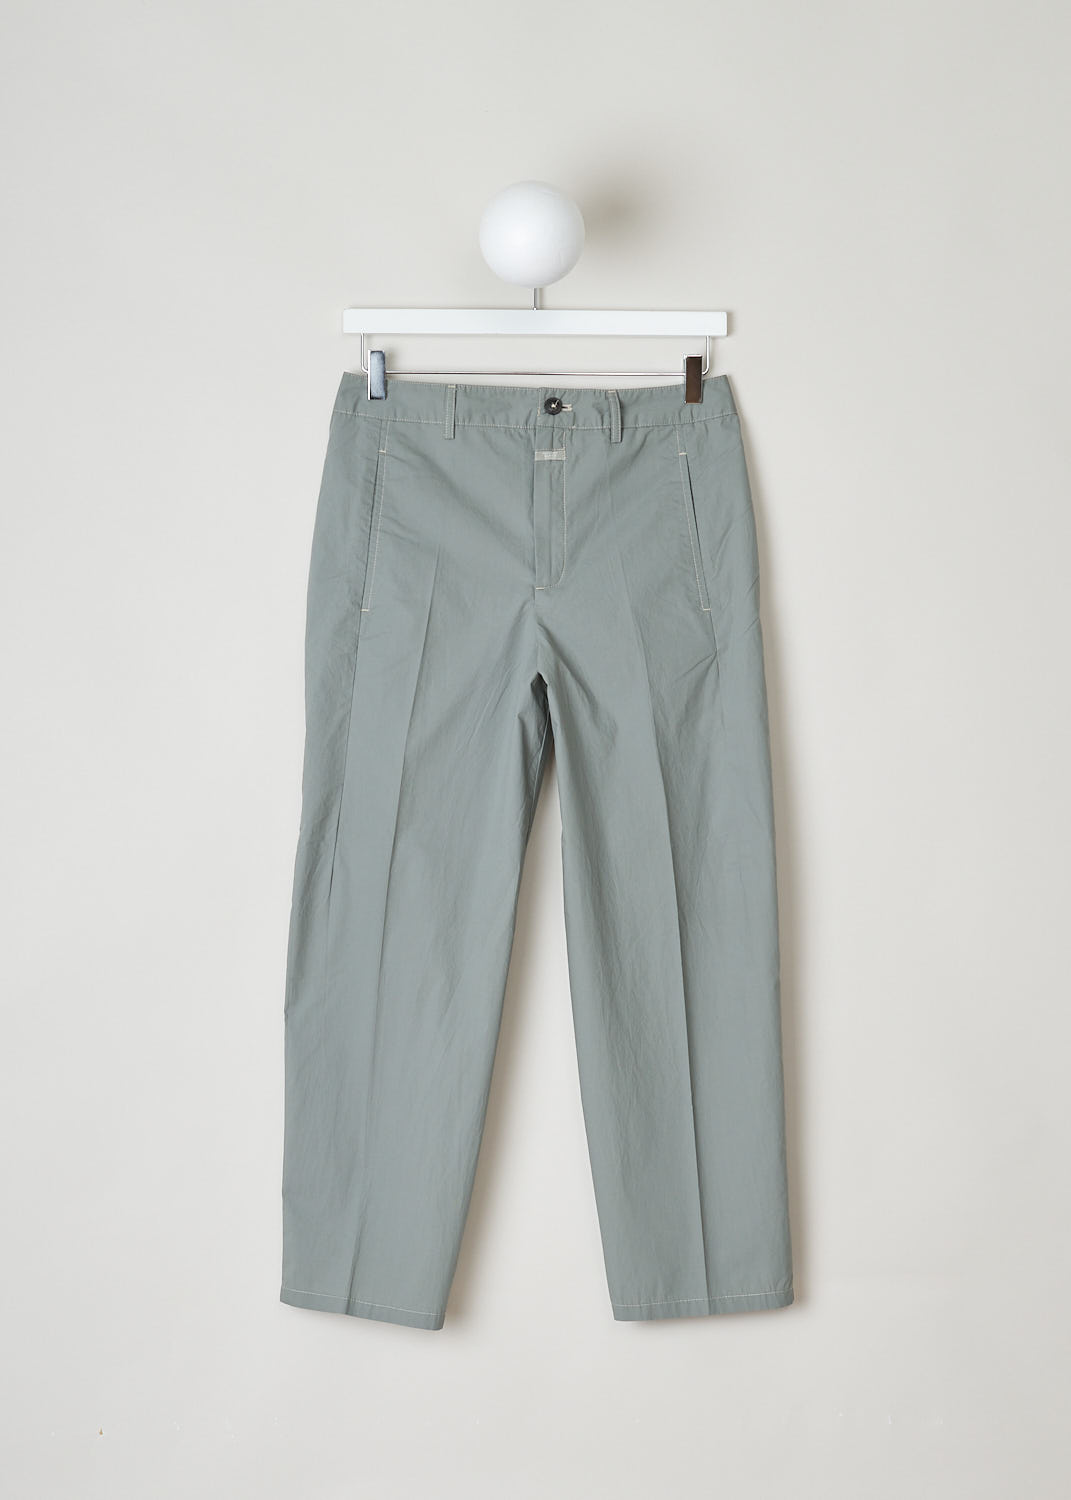 CLOSED, LIGHTWEIGHT GREY TROUSERS, LUDWIG_C91045_53A_22_691, Grey, Front, These comfortable grey trousers feature a regular length, two forward slanted pockets on the front and two welt pockets on the back.